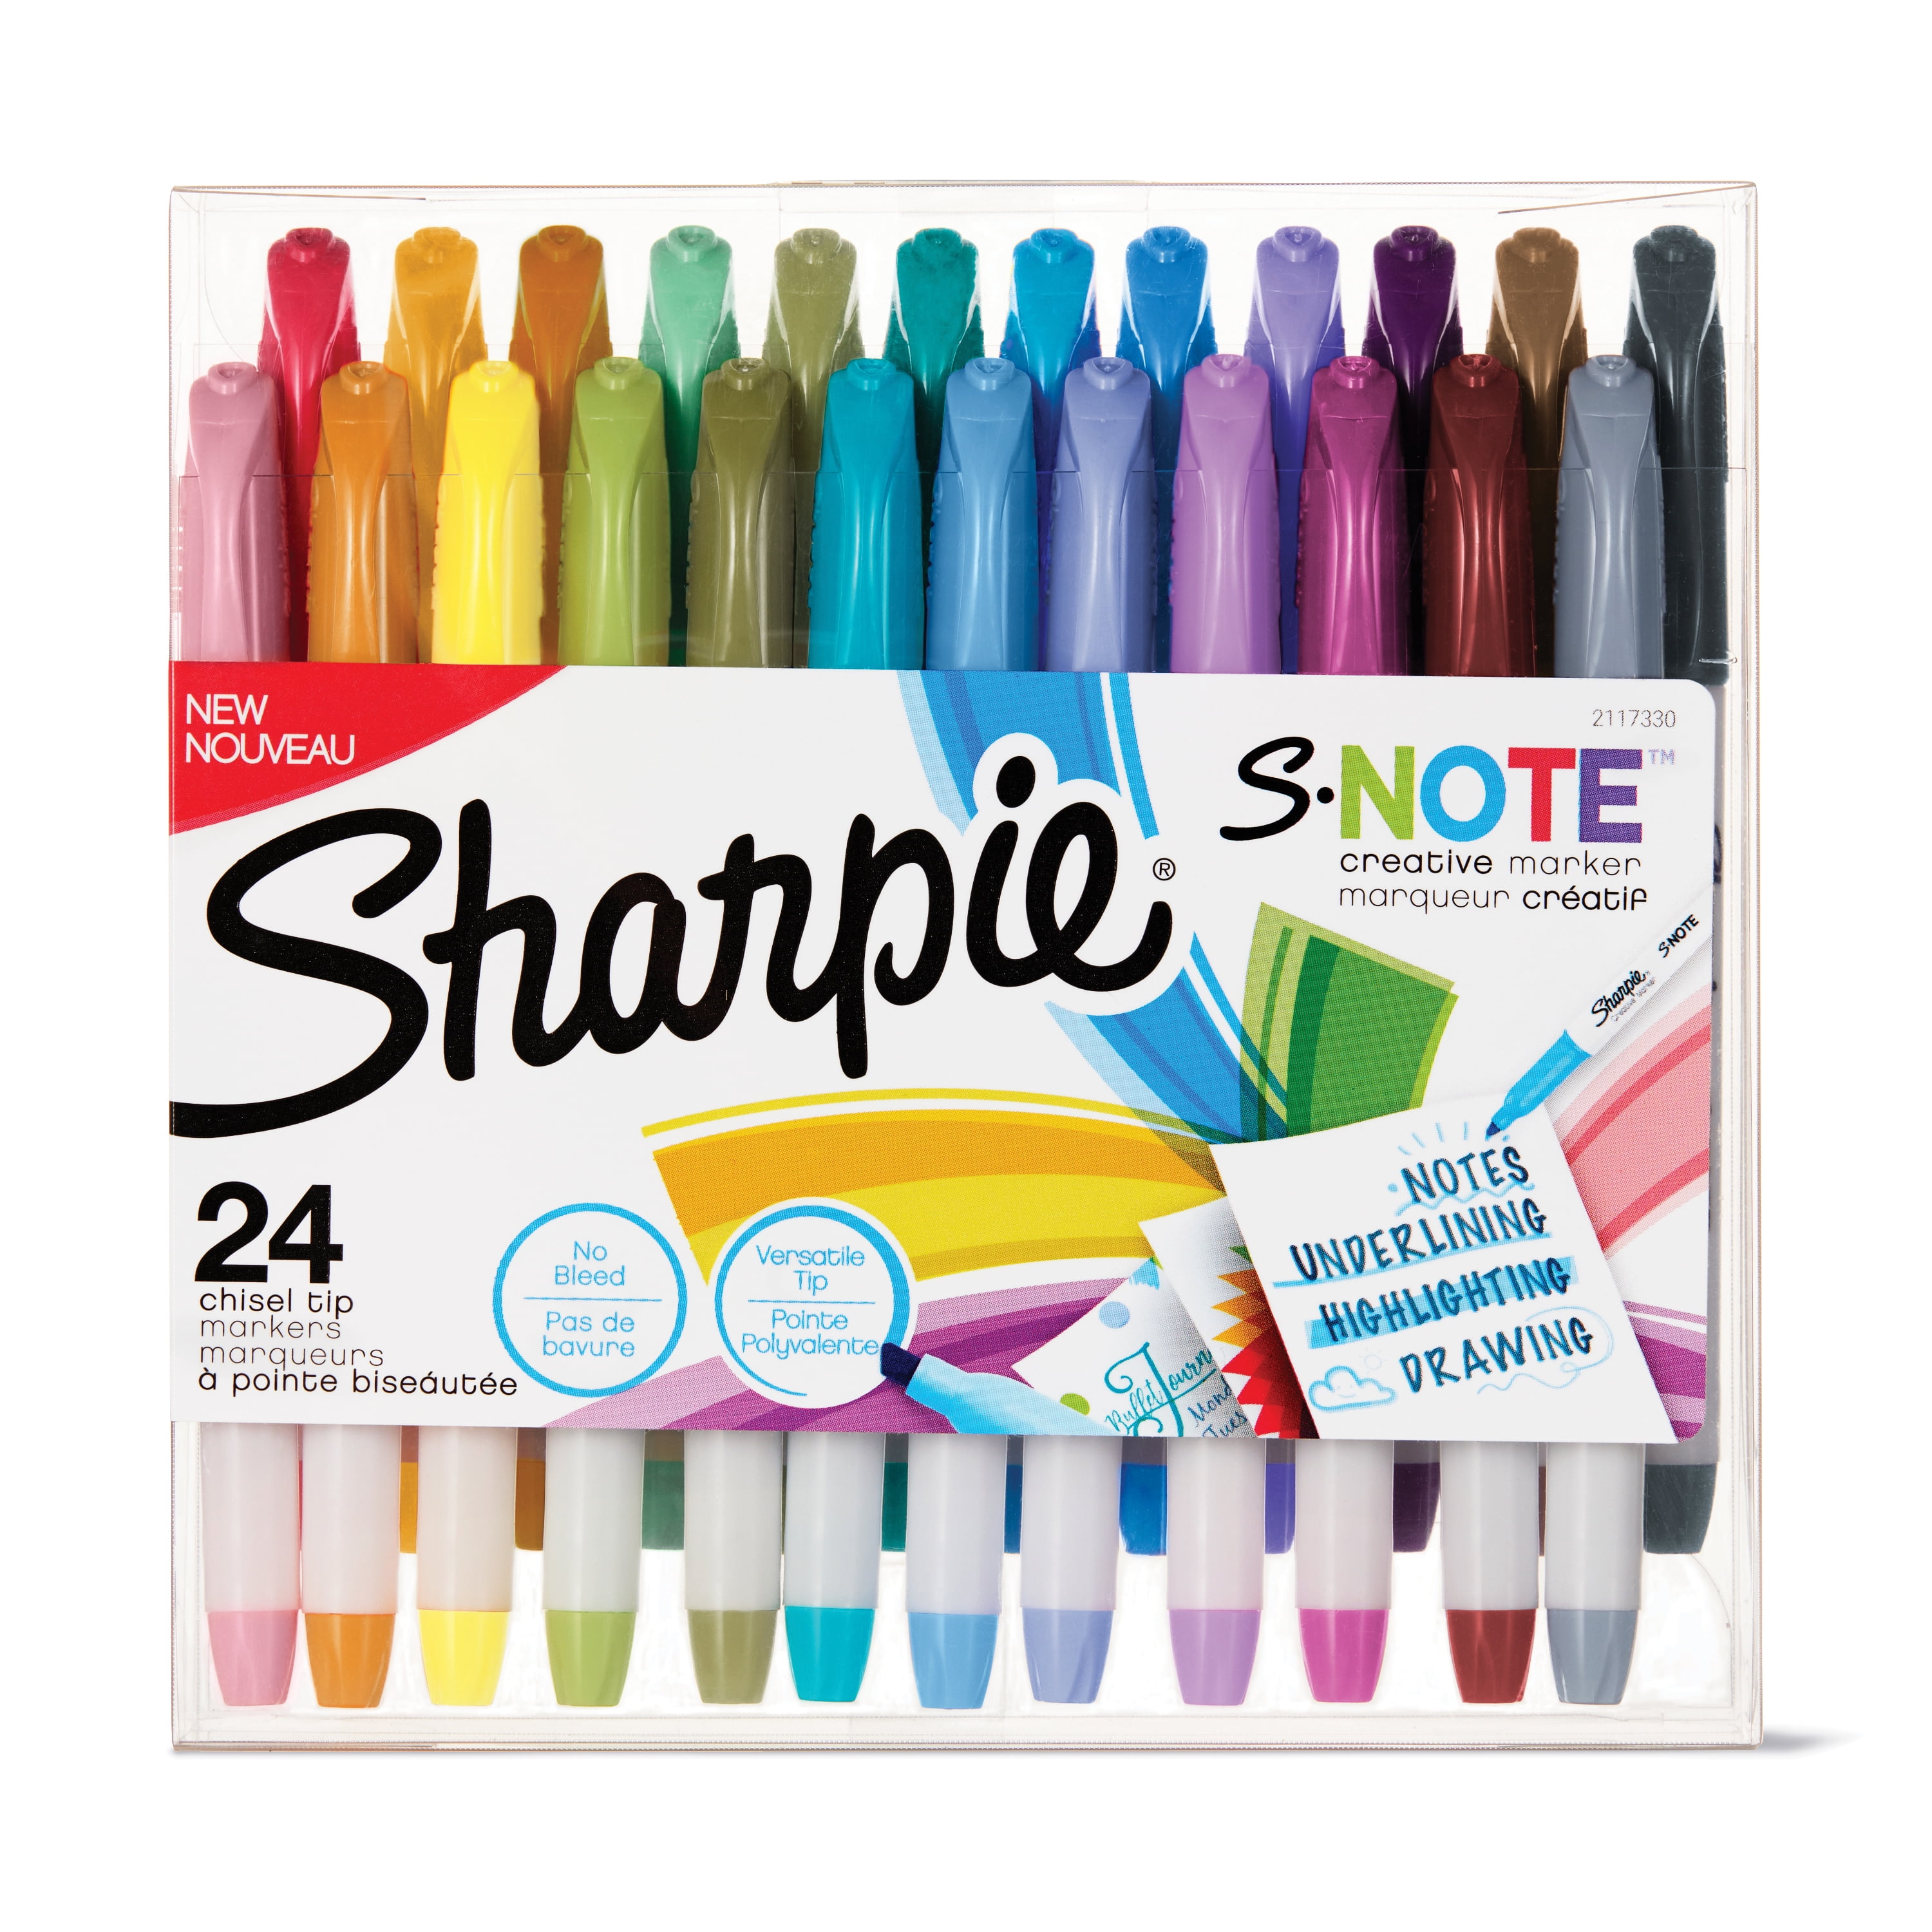 24 SHARPIE PERMANENT MARKERS FINE IN ASSORTED COLORS NEW FREE SHIPPING 1756744